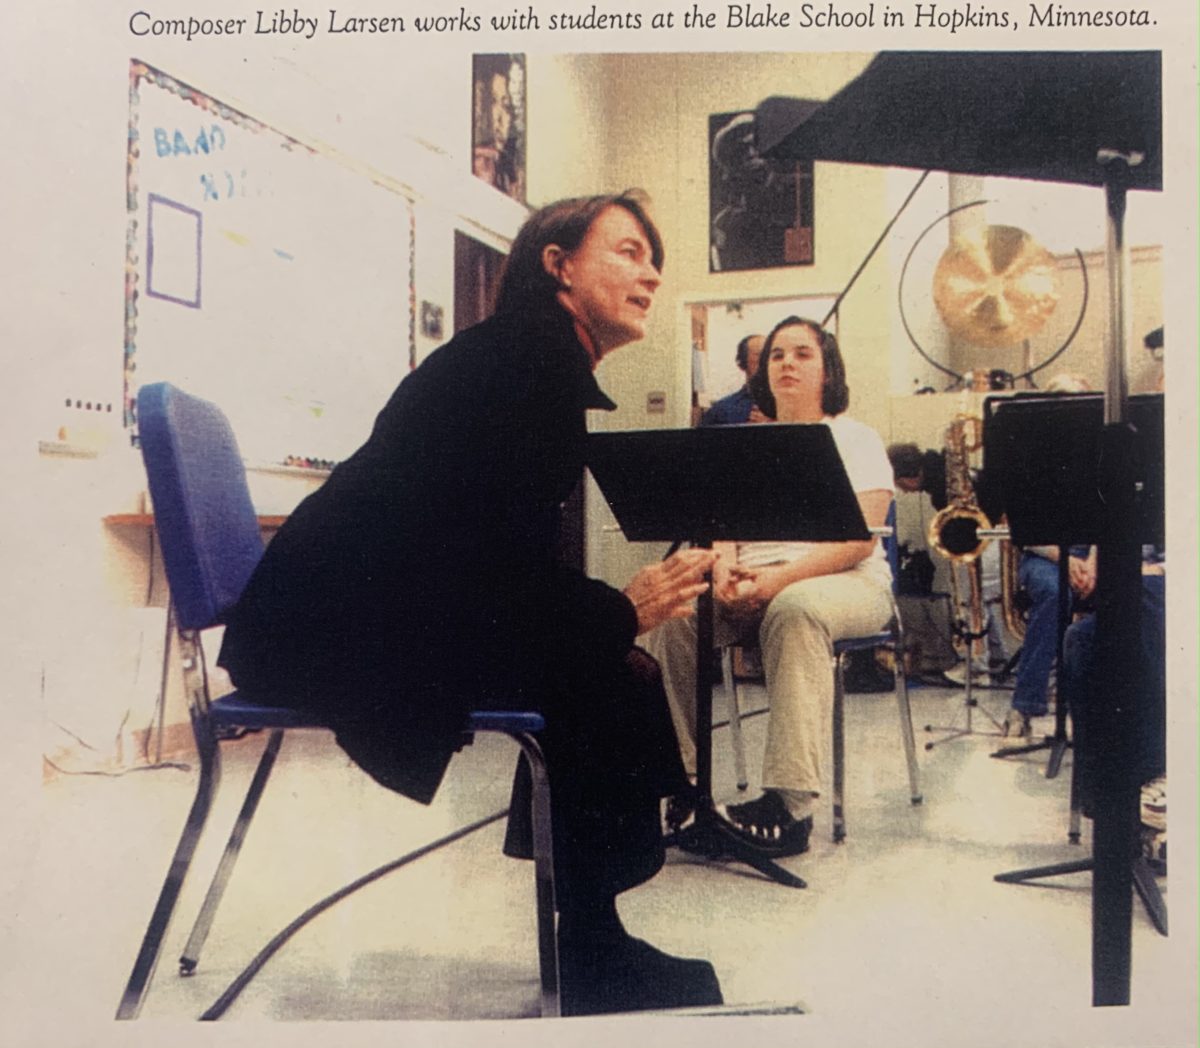 ACF Co-Founder Libby Larsen in rehearsals with students at the Blake School in Hopkins, MN.